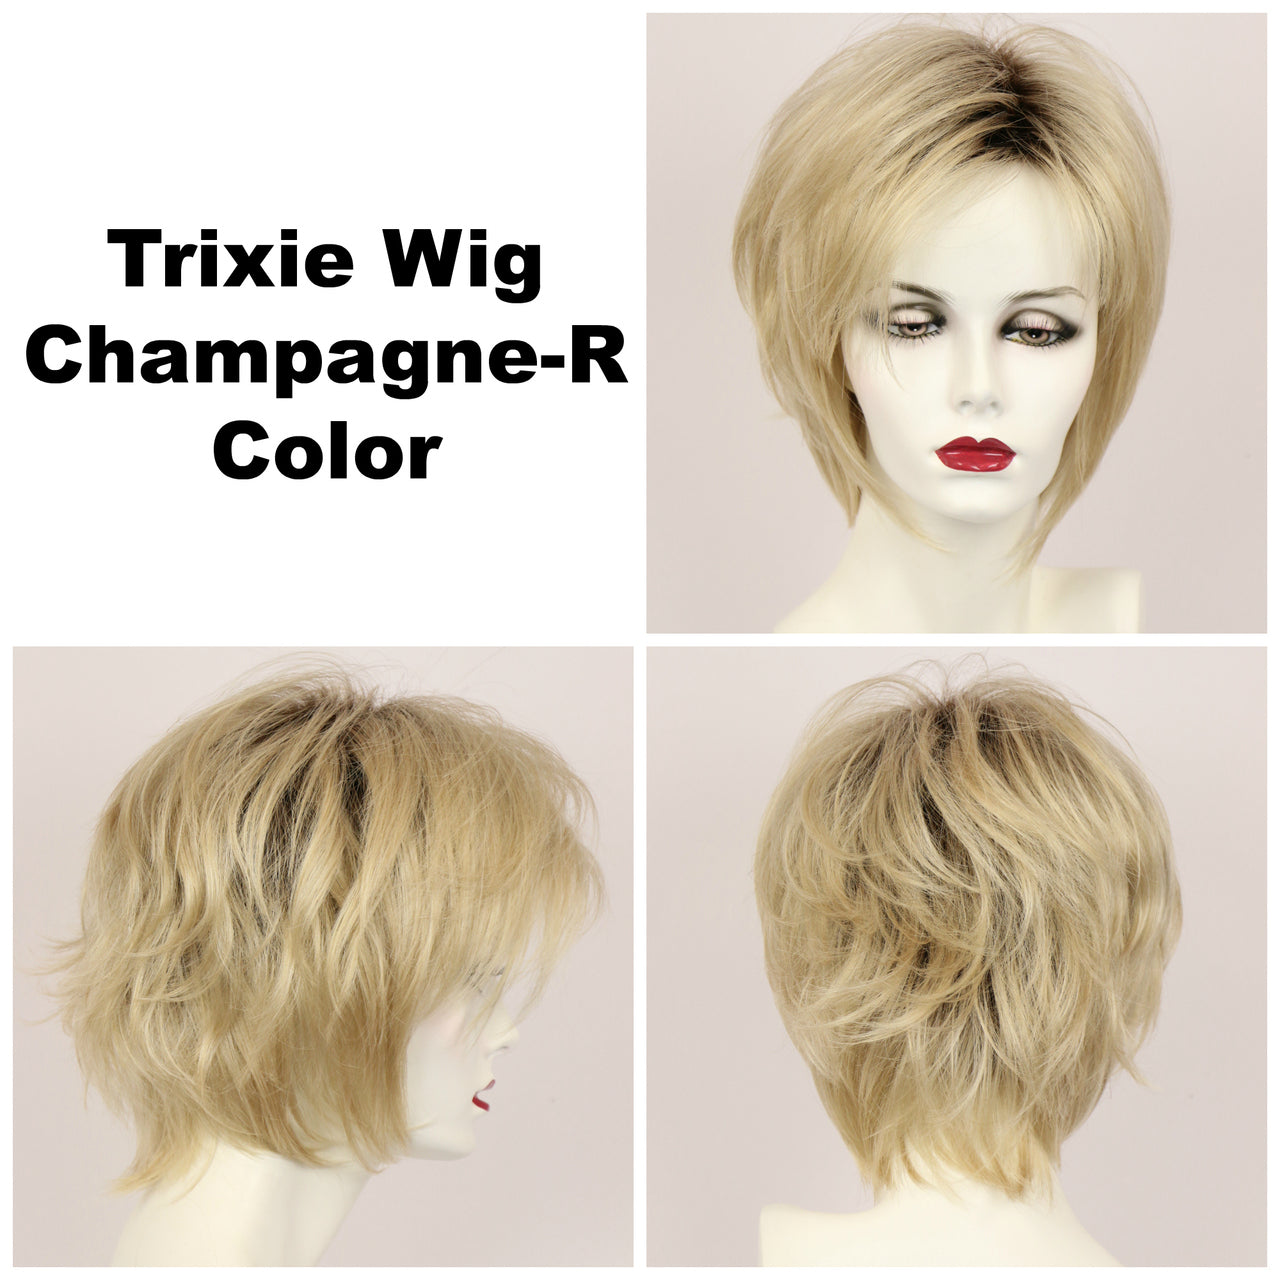 Champagne-R / Large Trixie w/ Roots / Medium Wig